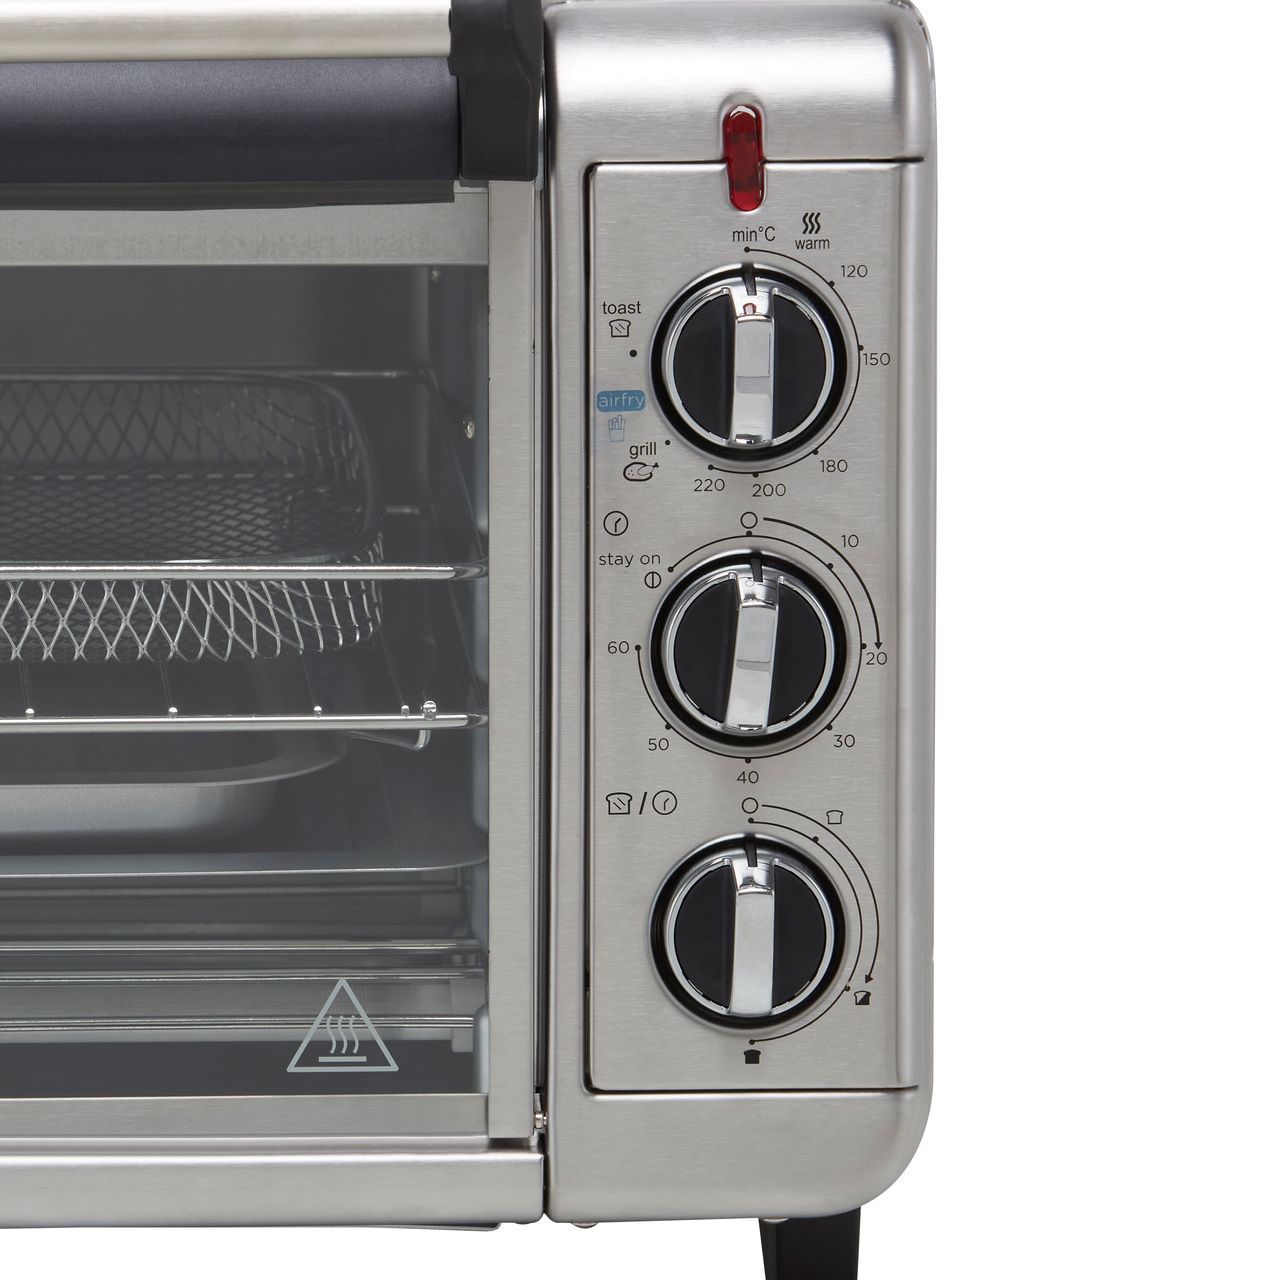 Russell Hobbs 26095 Mini Oven 1500 W 12.6 liters Stainless Steel